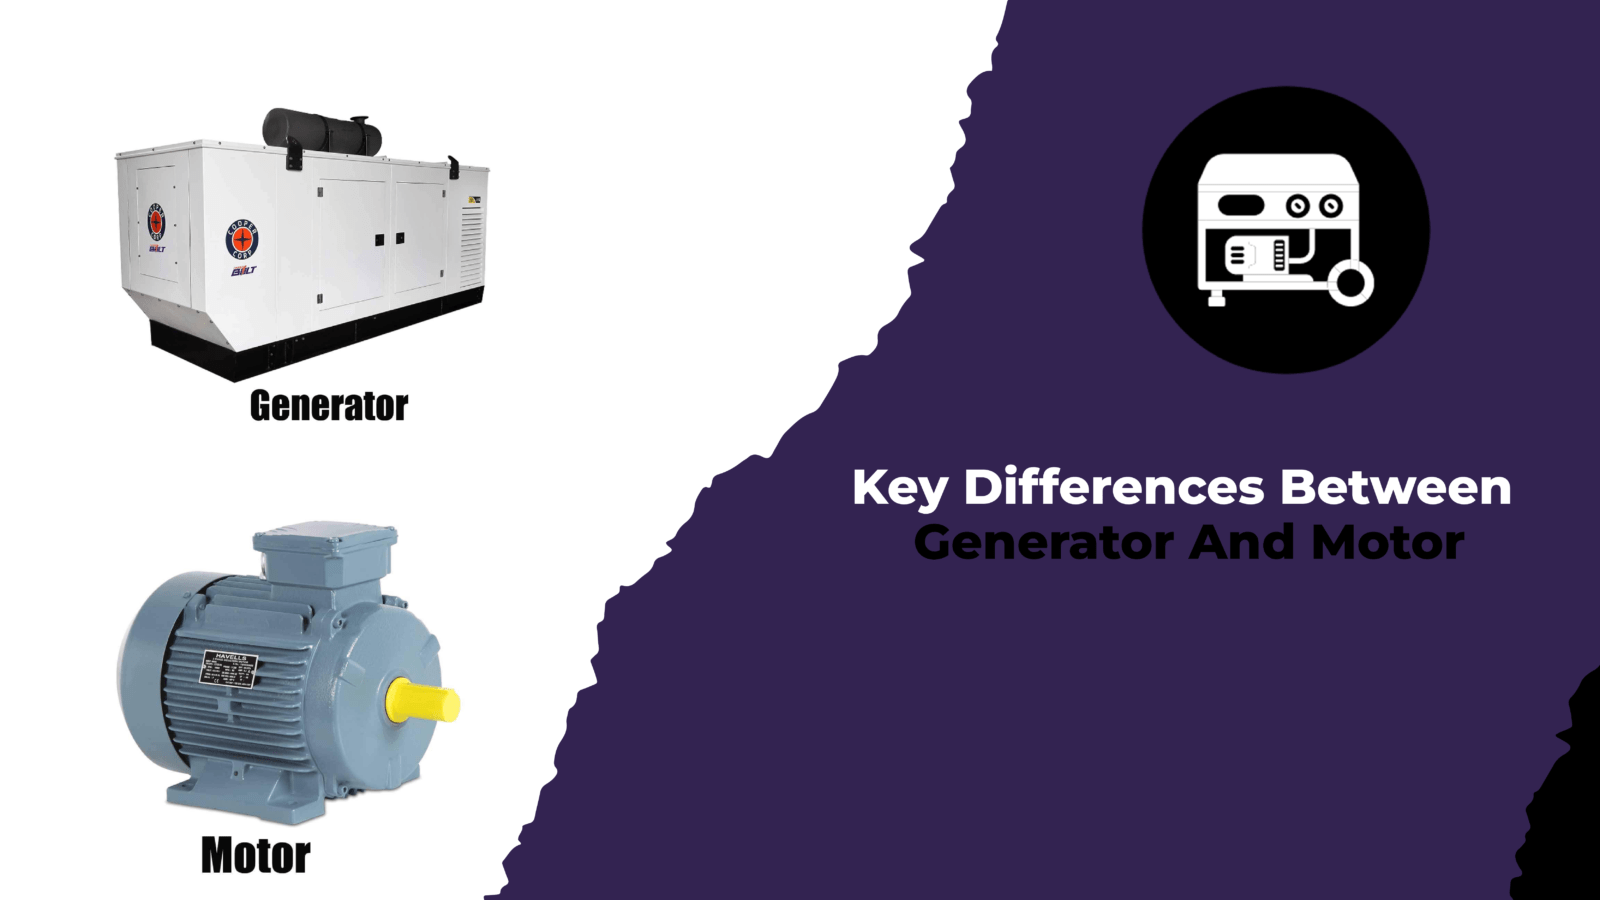 Key Differences Between Generator And Motor